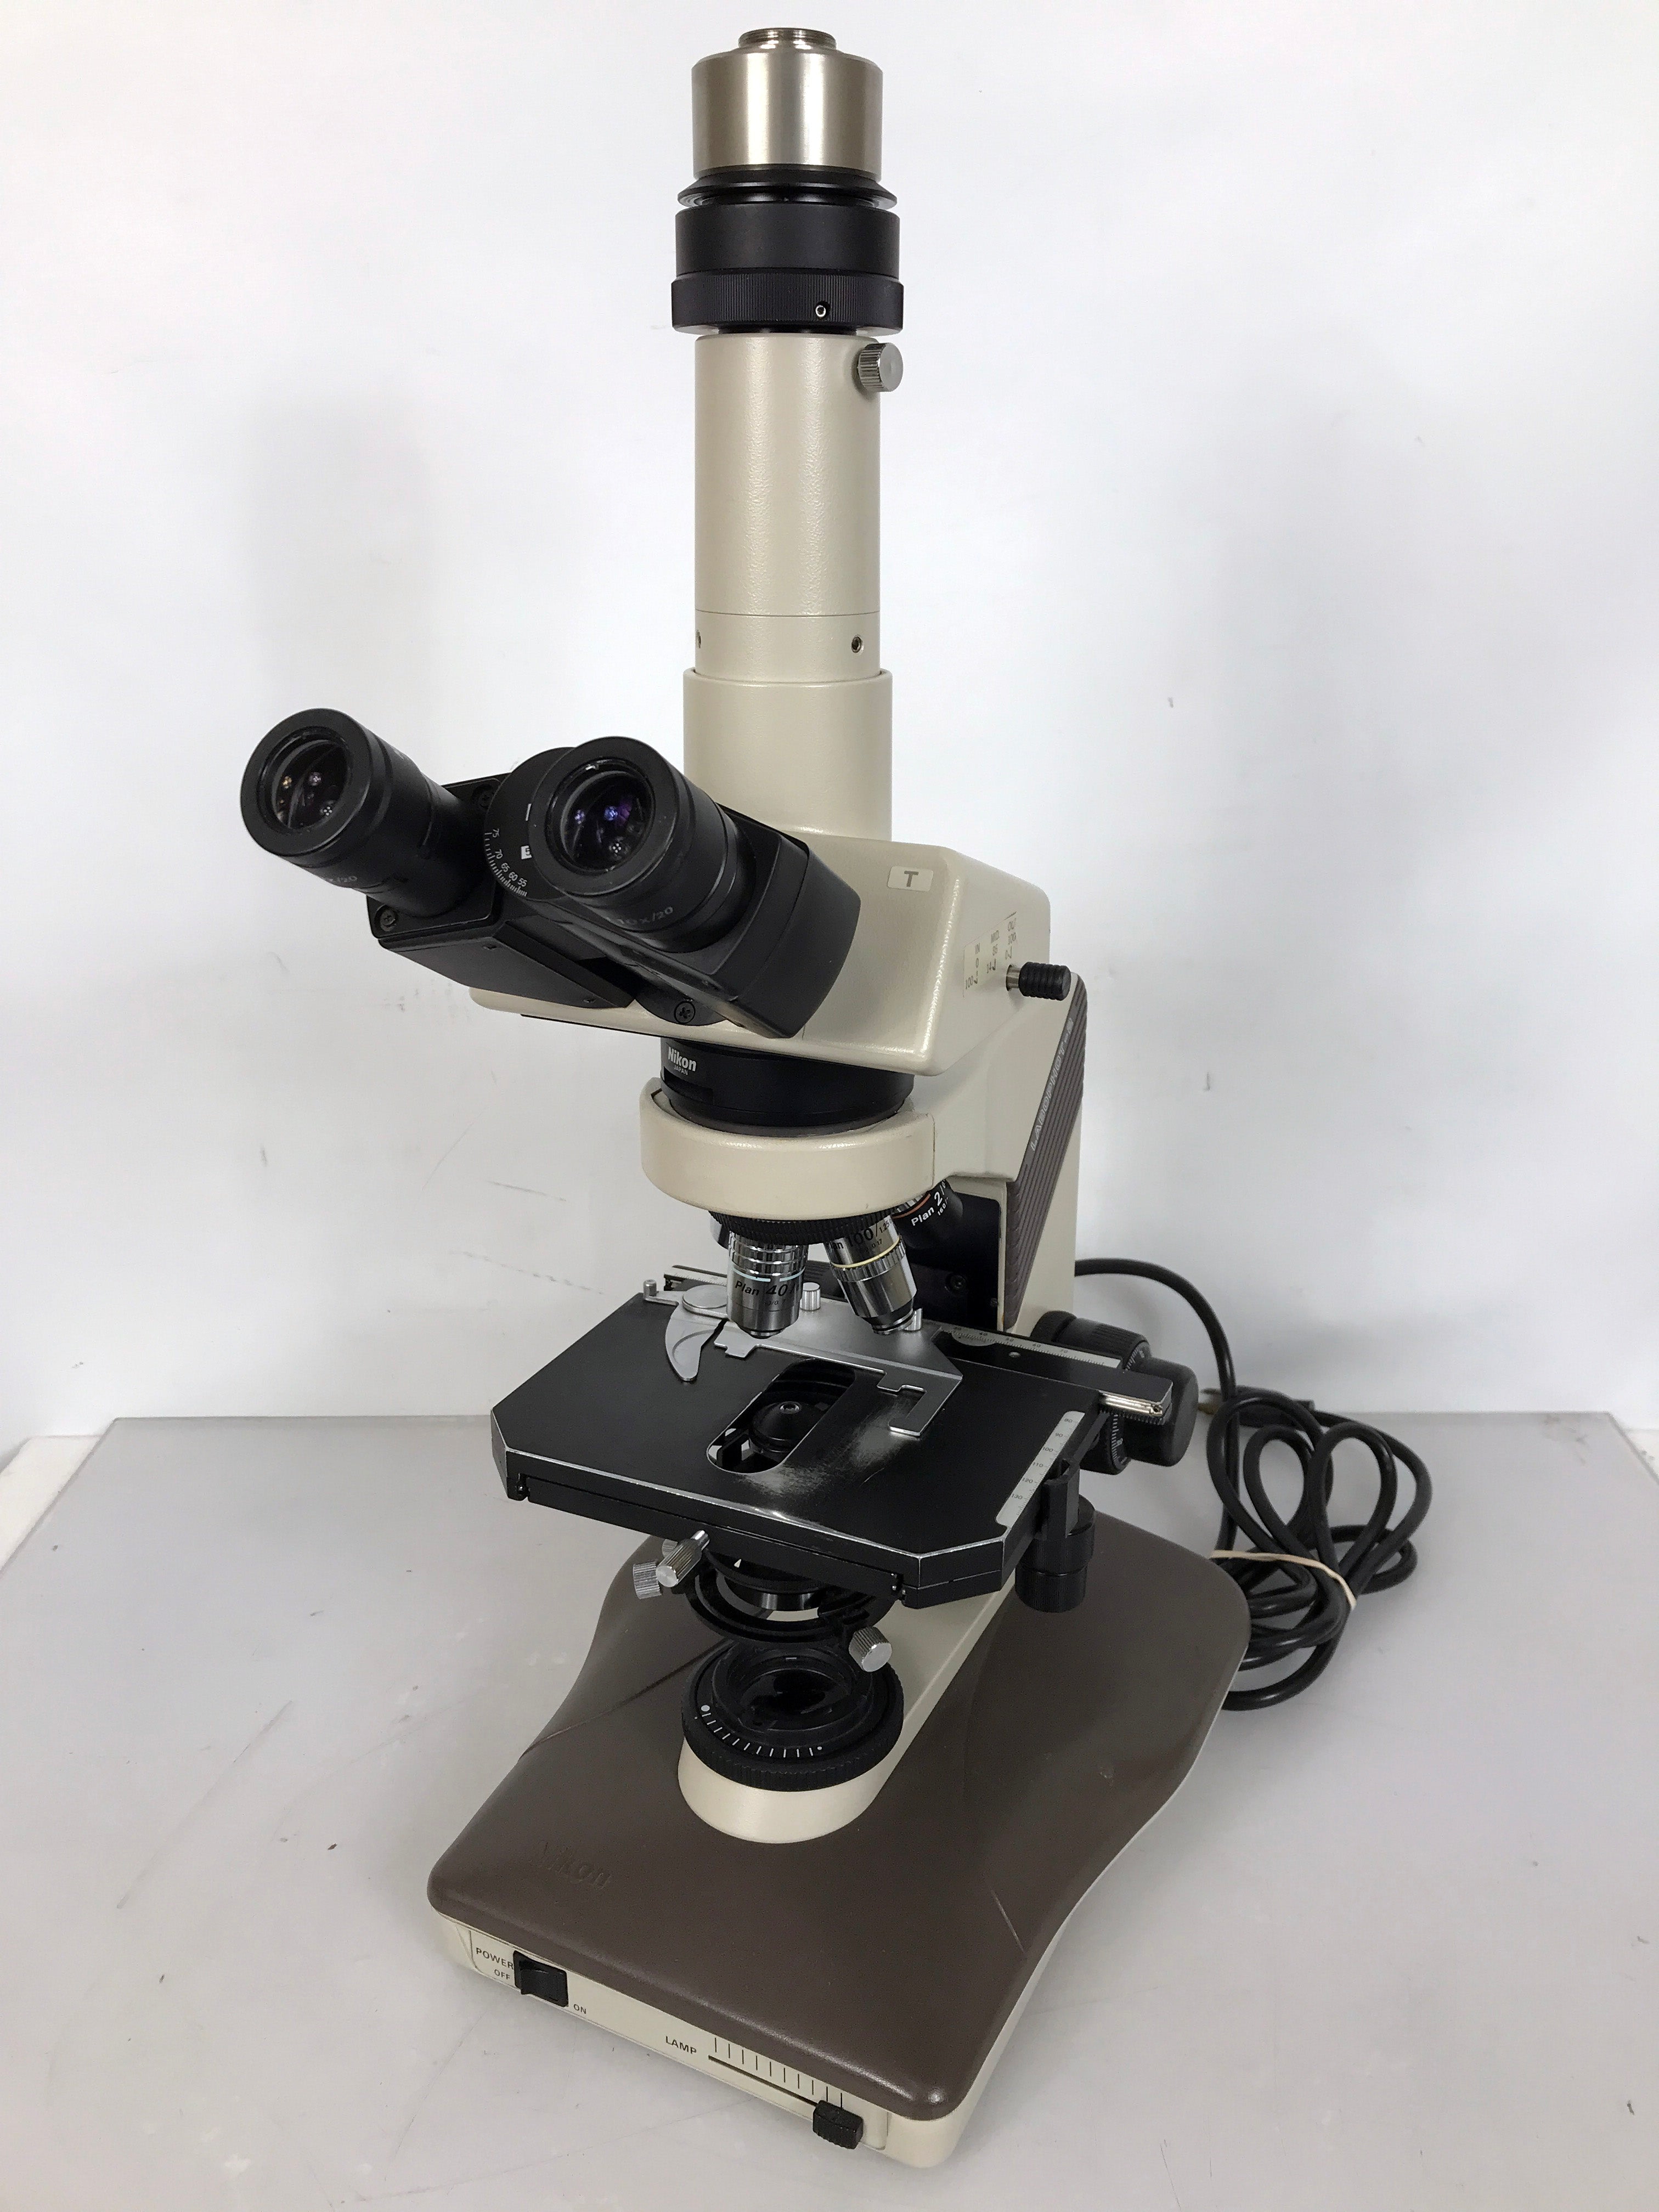 Nikon Labophot 2 Trinocular Microscope with 5 Objectives *For Parts or Repair*